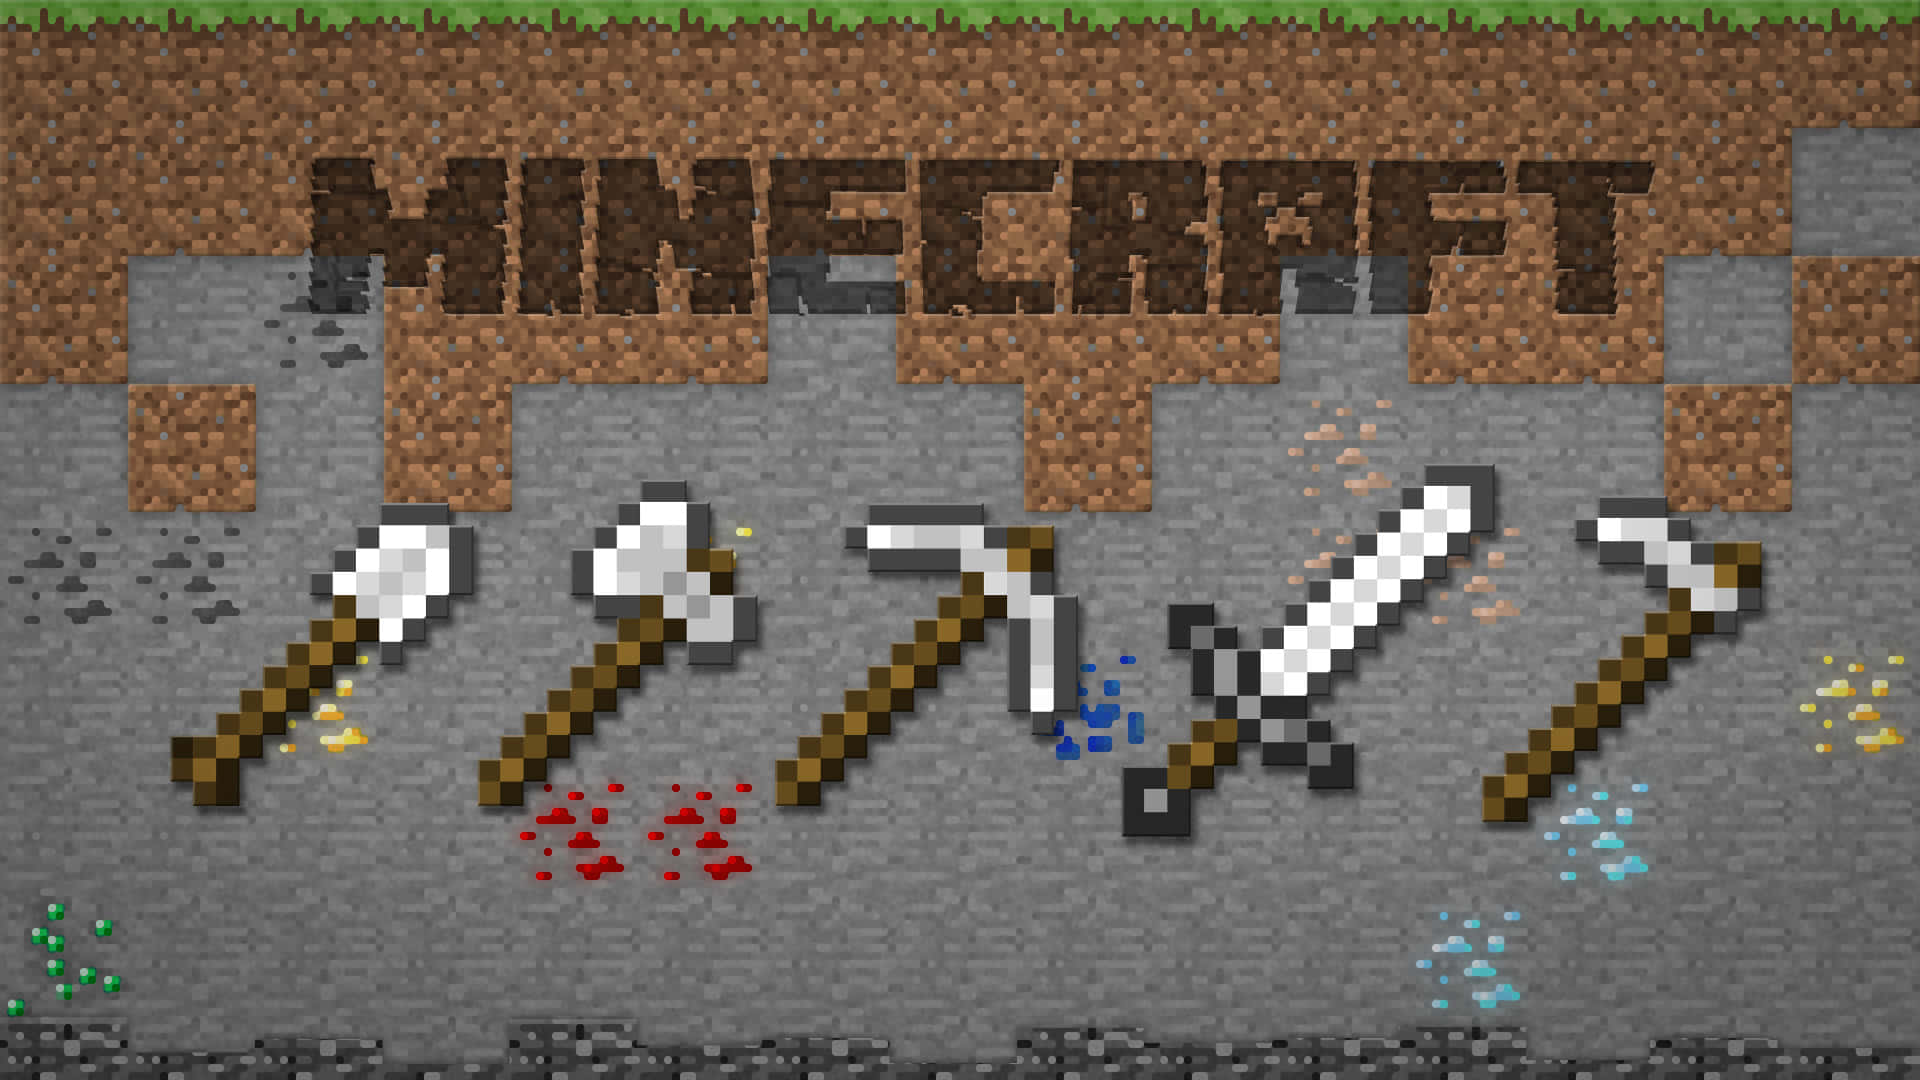 The Ultimate Arsenal - Minecraft Weapons Galore Wallpaper